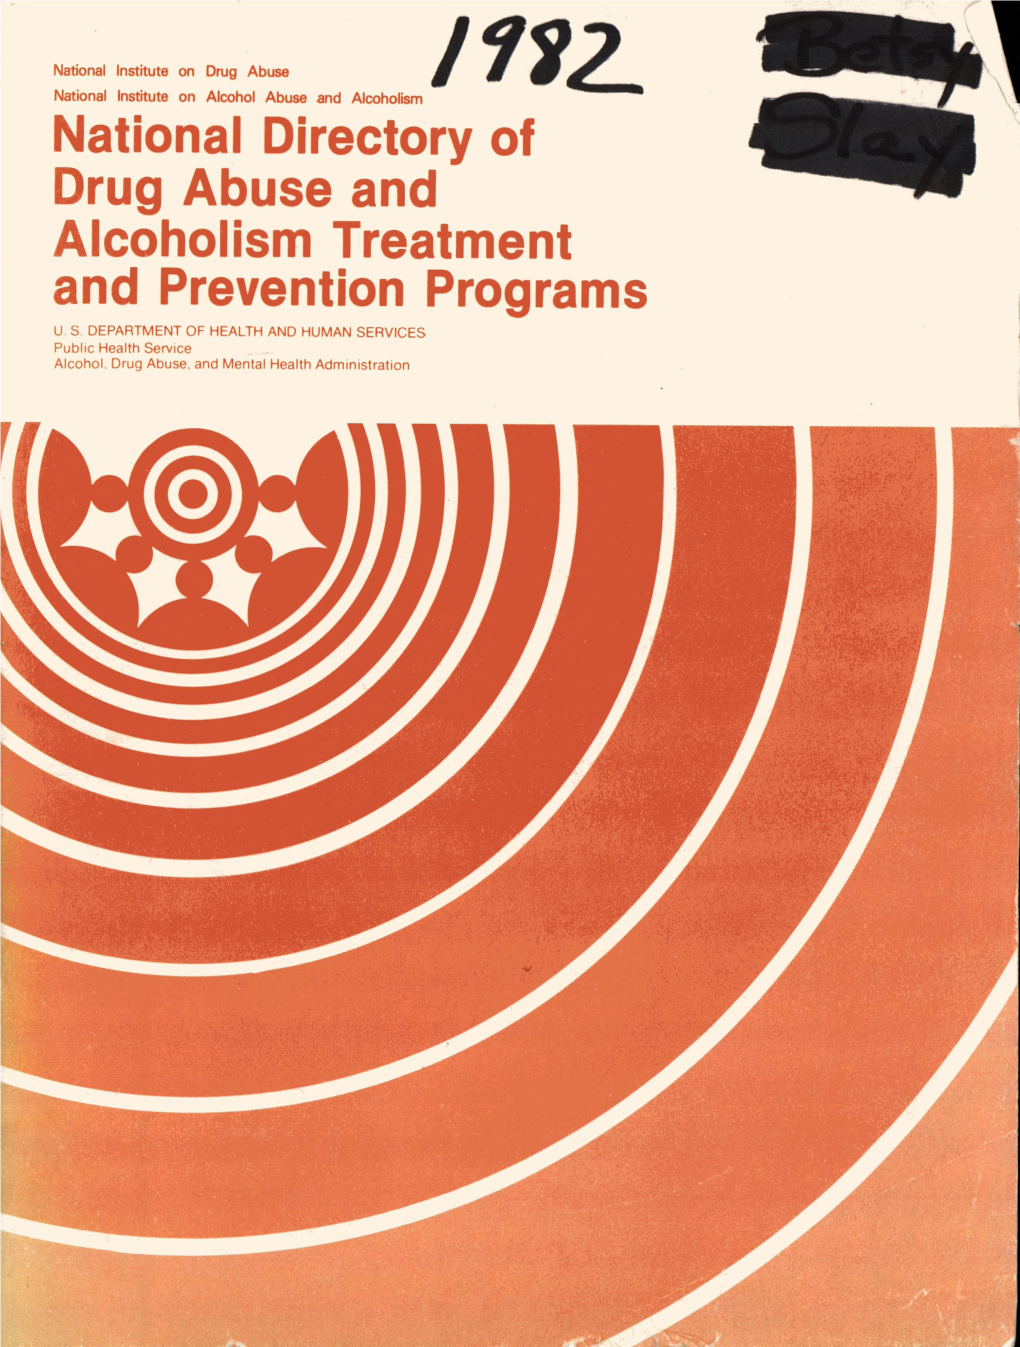 Drug Abuse National Institute on Alcohol Abuse and Alcoholism National Directory of Drug Abuse and Alcoholism Treatment and Prevention Programs U